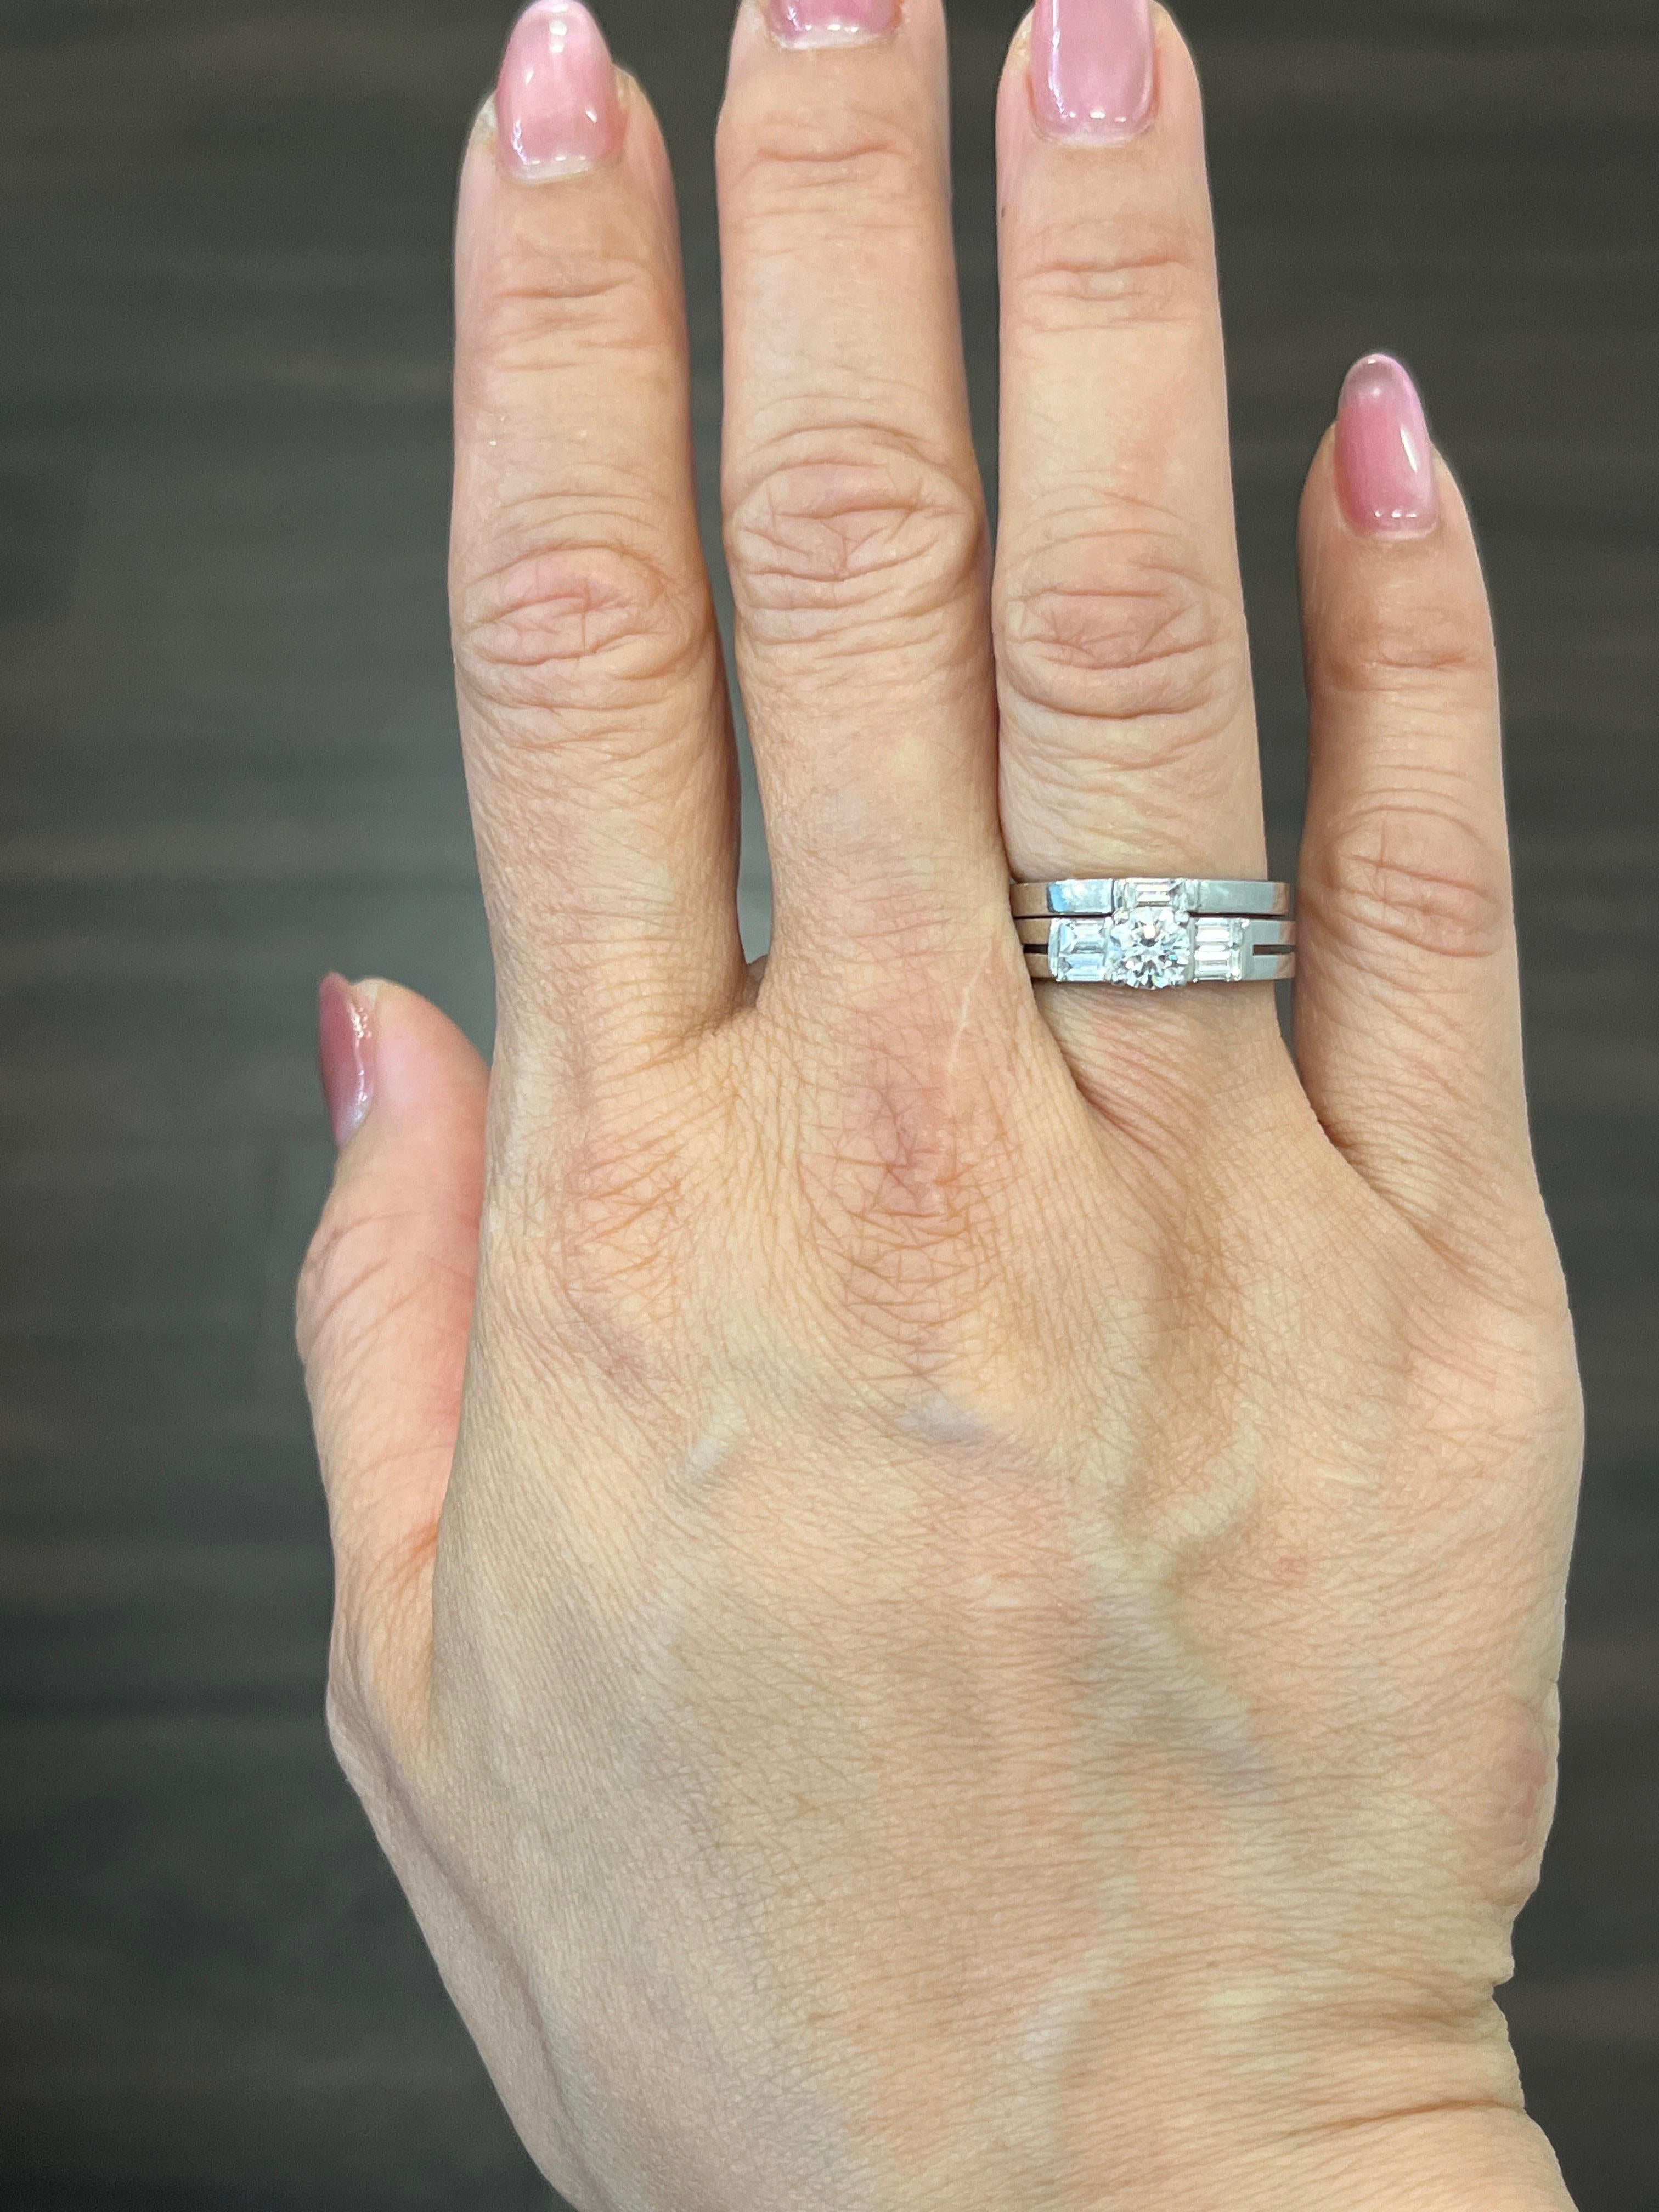 This stunning diamond engagement ring set features a center stone weighing 0.50 ct and 5 baguette diamonds weighing 0.50 ct set in platinum. The center stone boasts a color G, and a clarity of SI1. The baguettes are F in color, VS1 in clarity. A